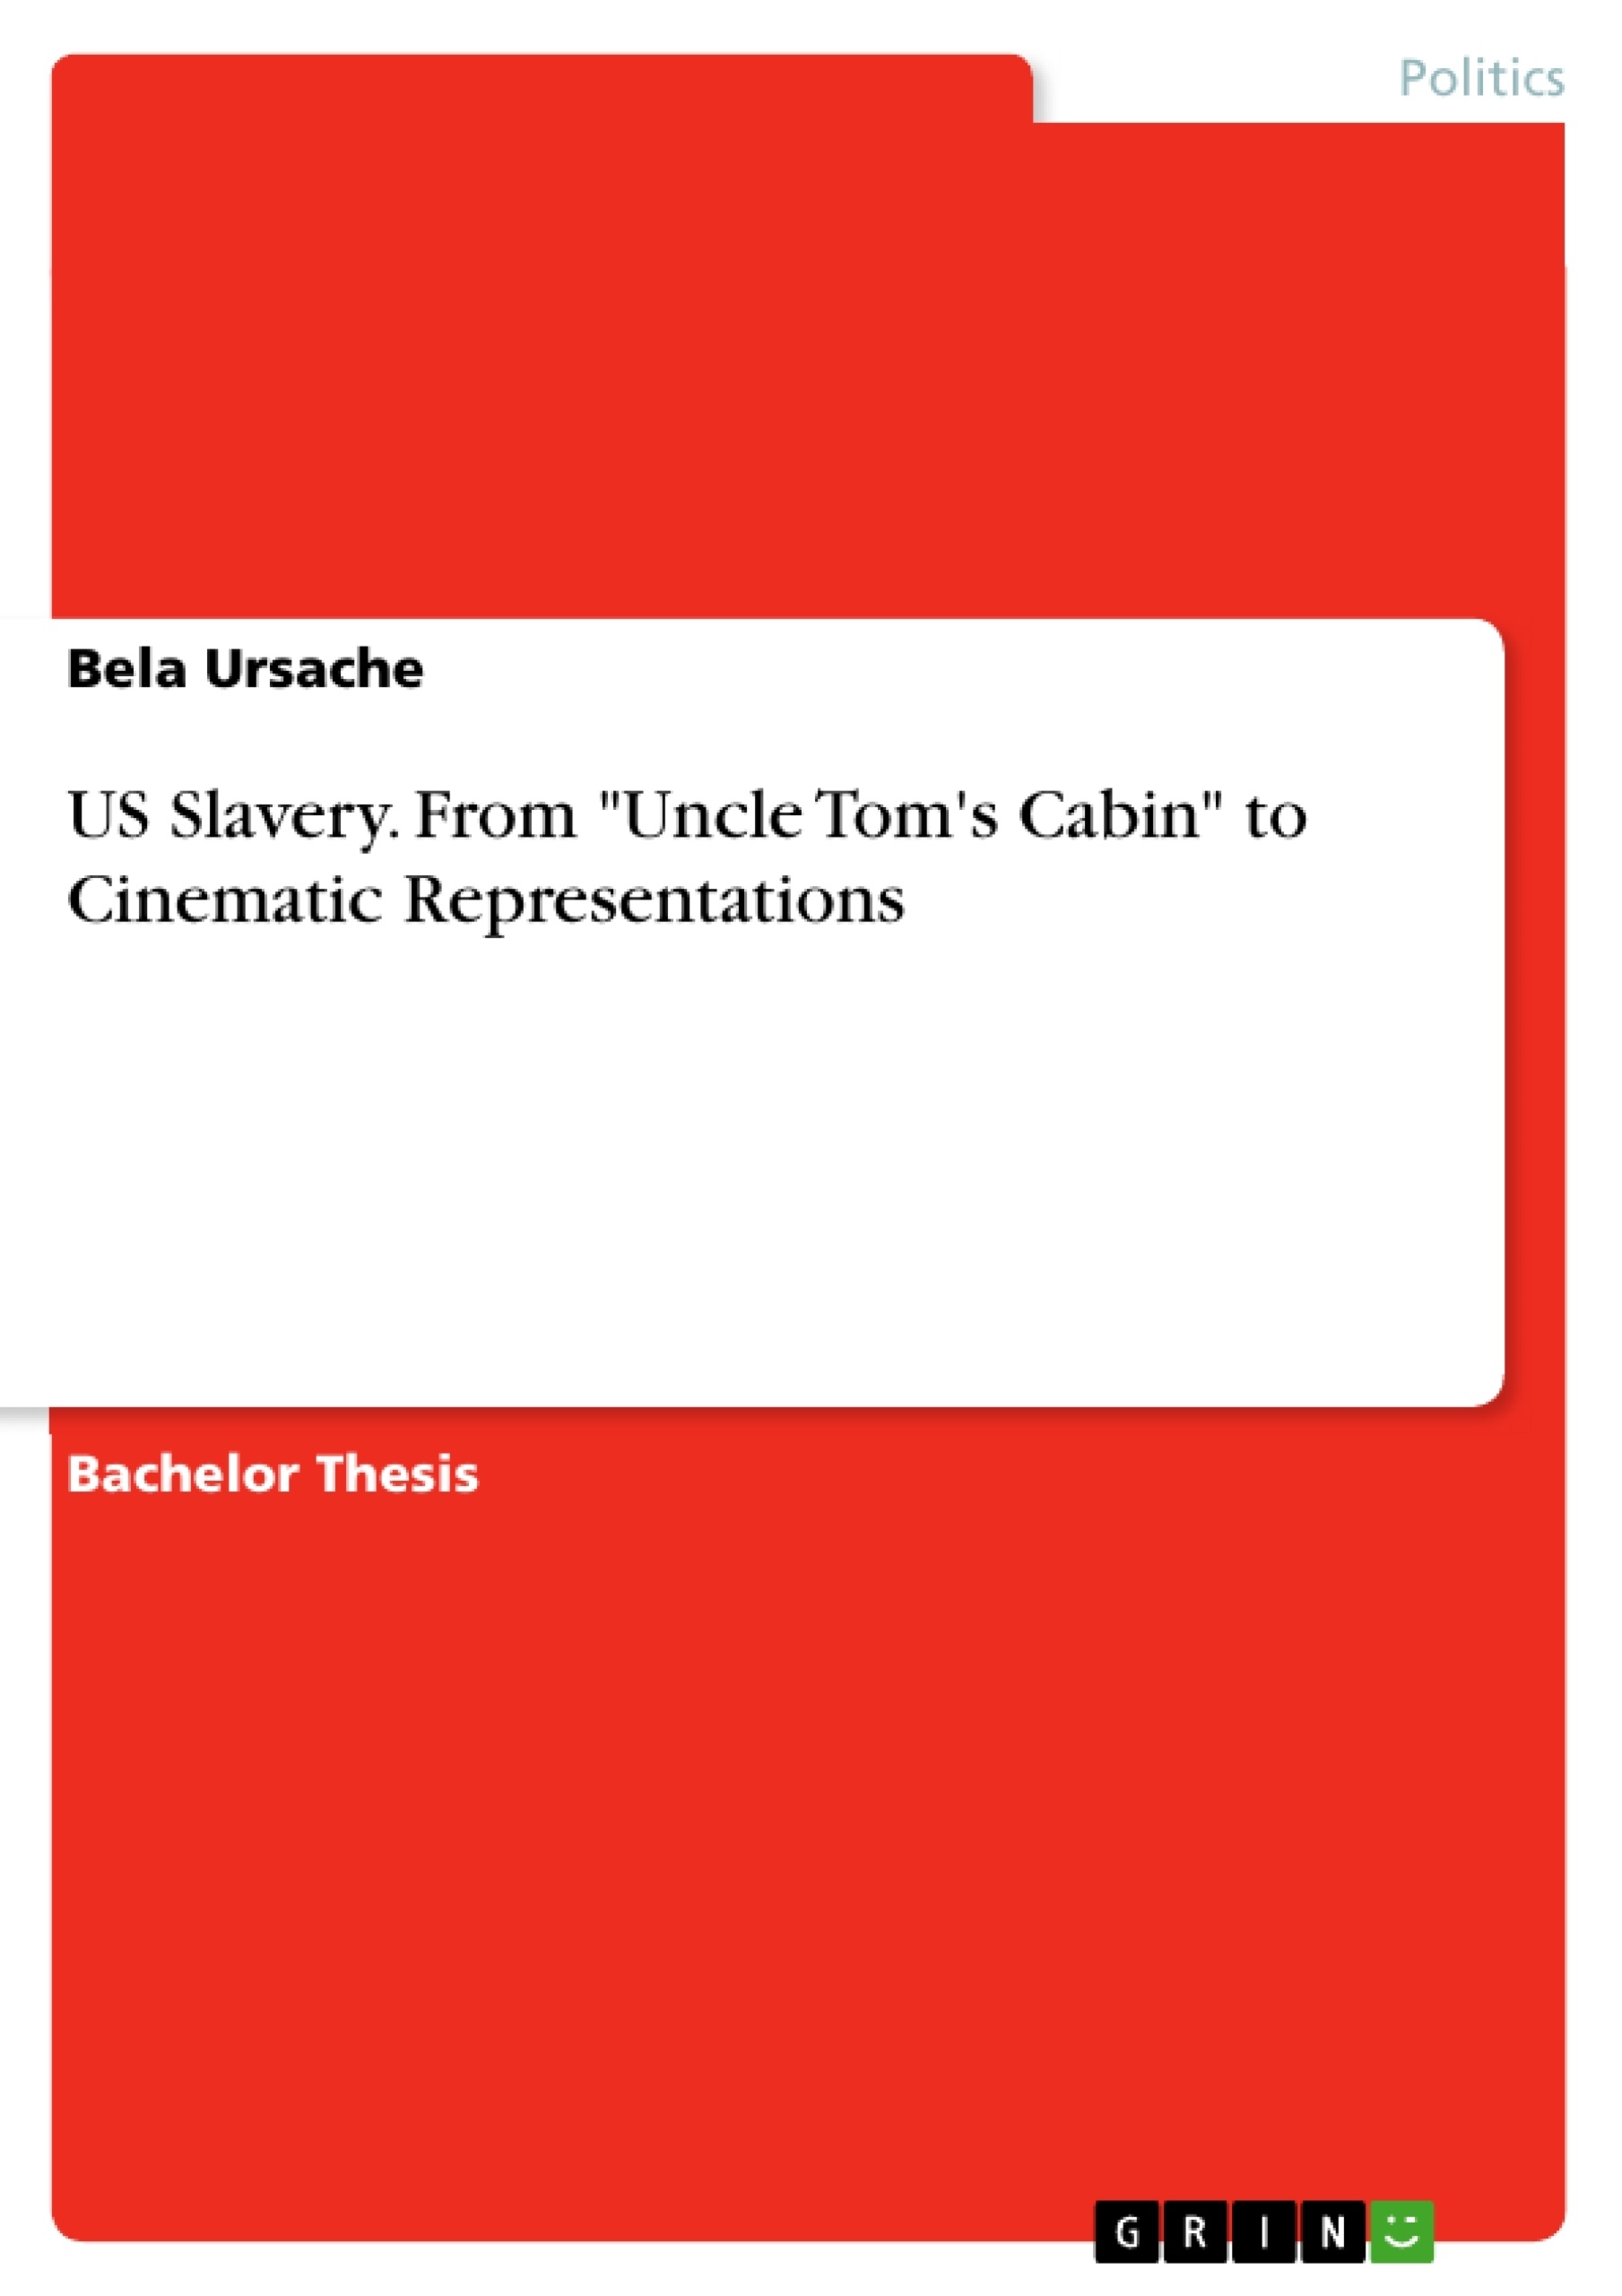 Titel: US Slavery. From "Uncle Tom's Cabin" to Cinematic Representations